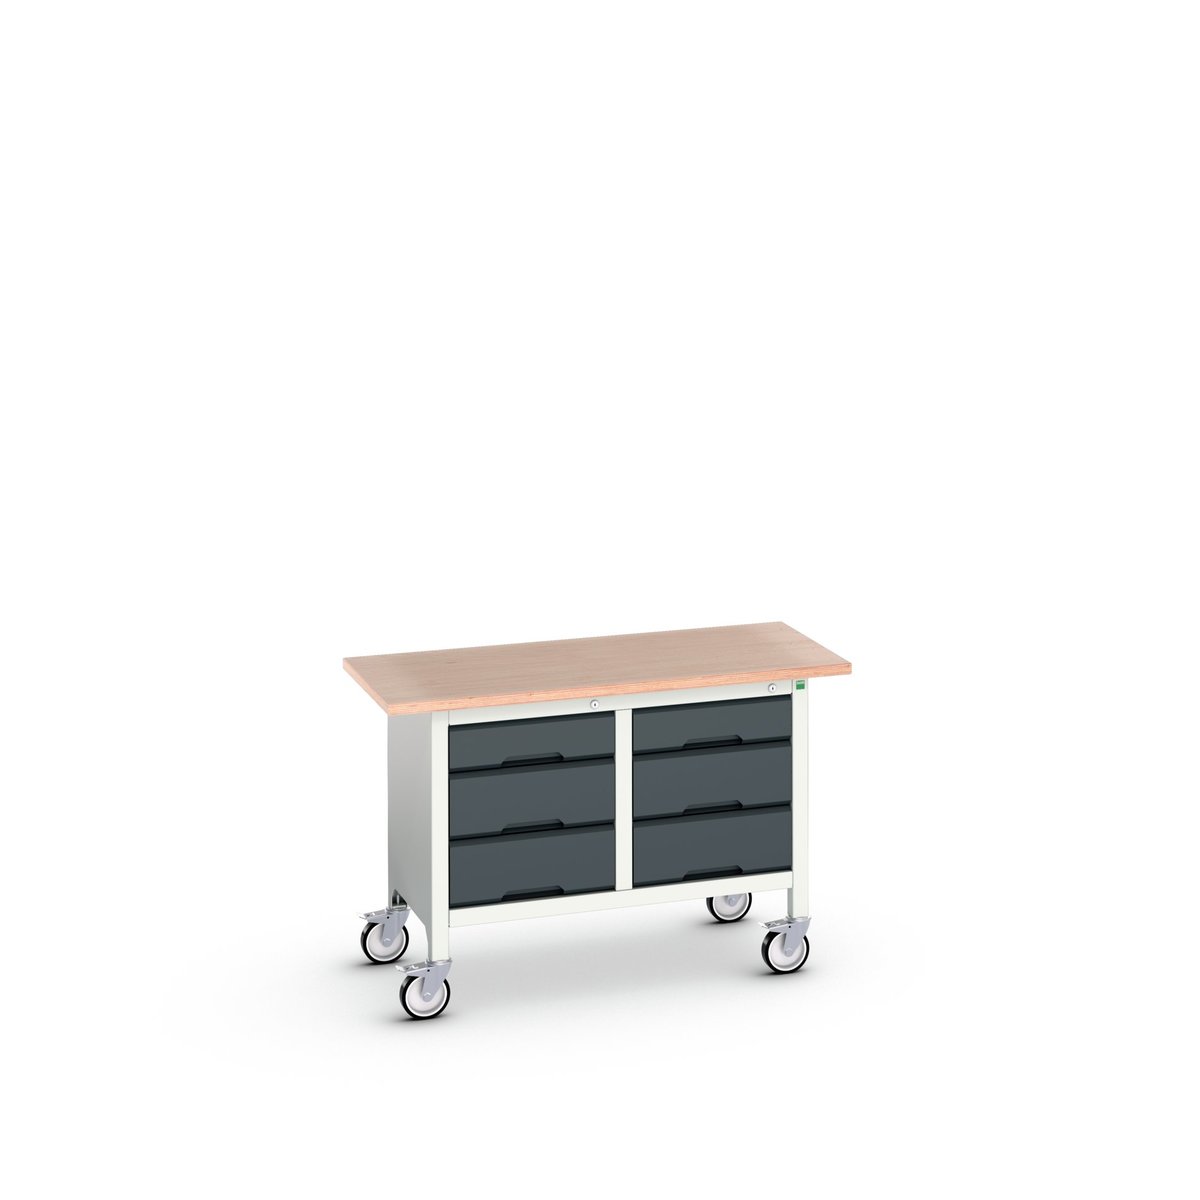 16923204. - verso mobile storage bench (mpx)